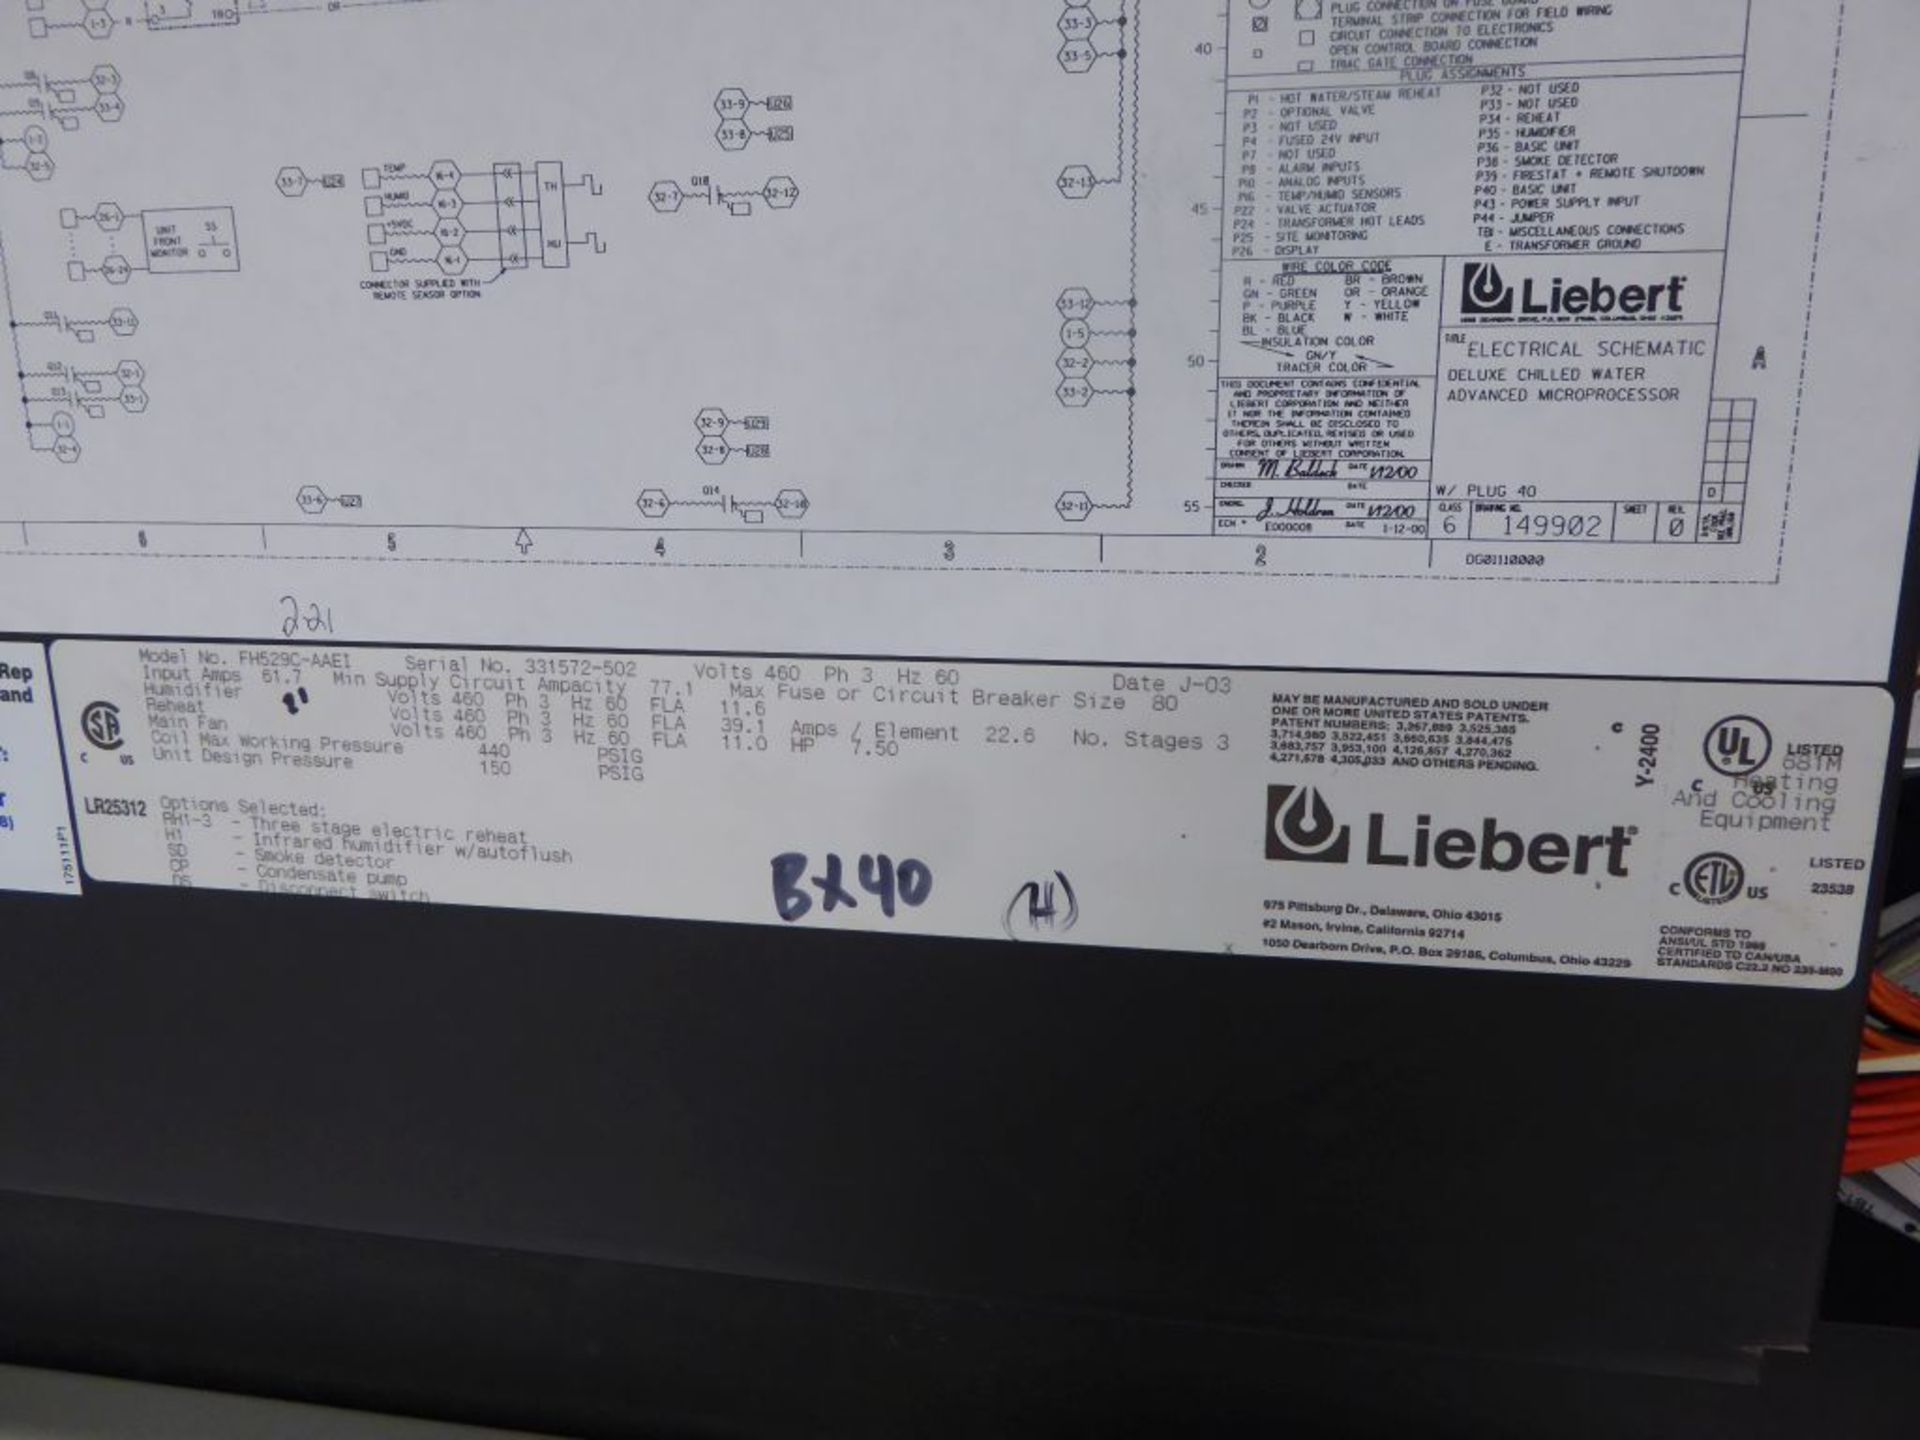 Charlotte, NC - Liebert Deluxe Chilled Water Advanced Microprocessor - Image 3 of 6